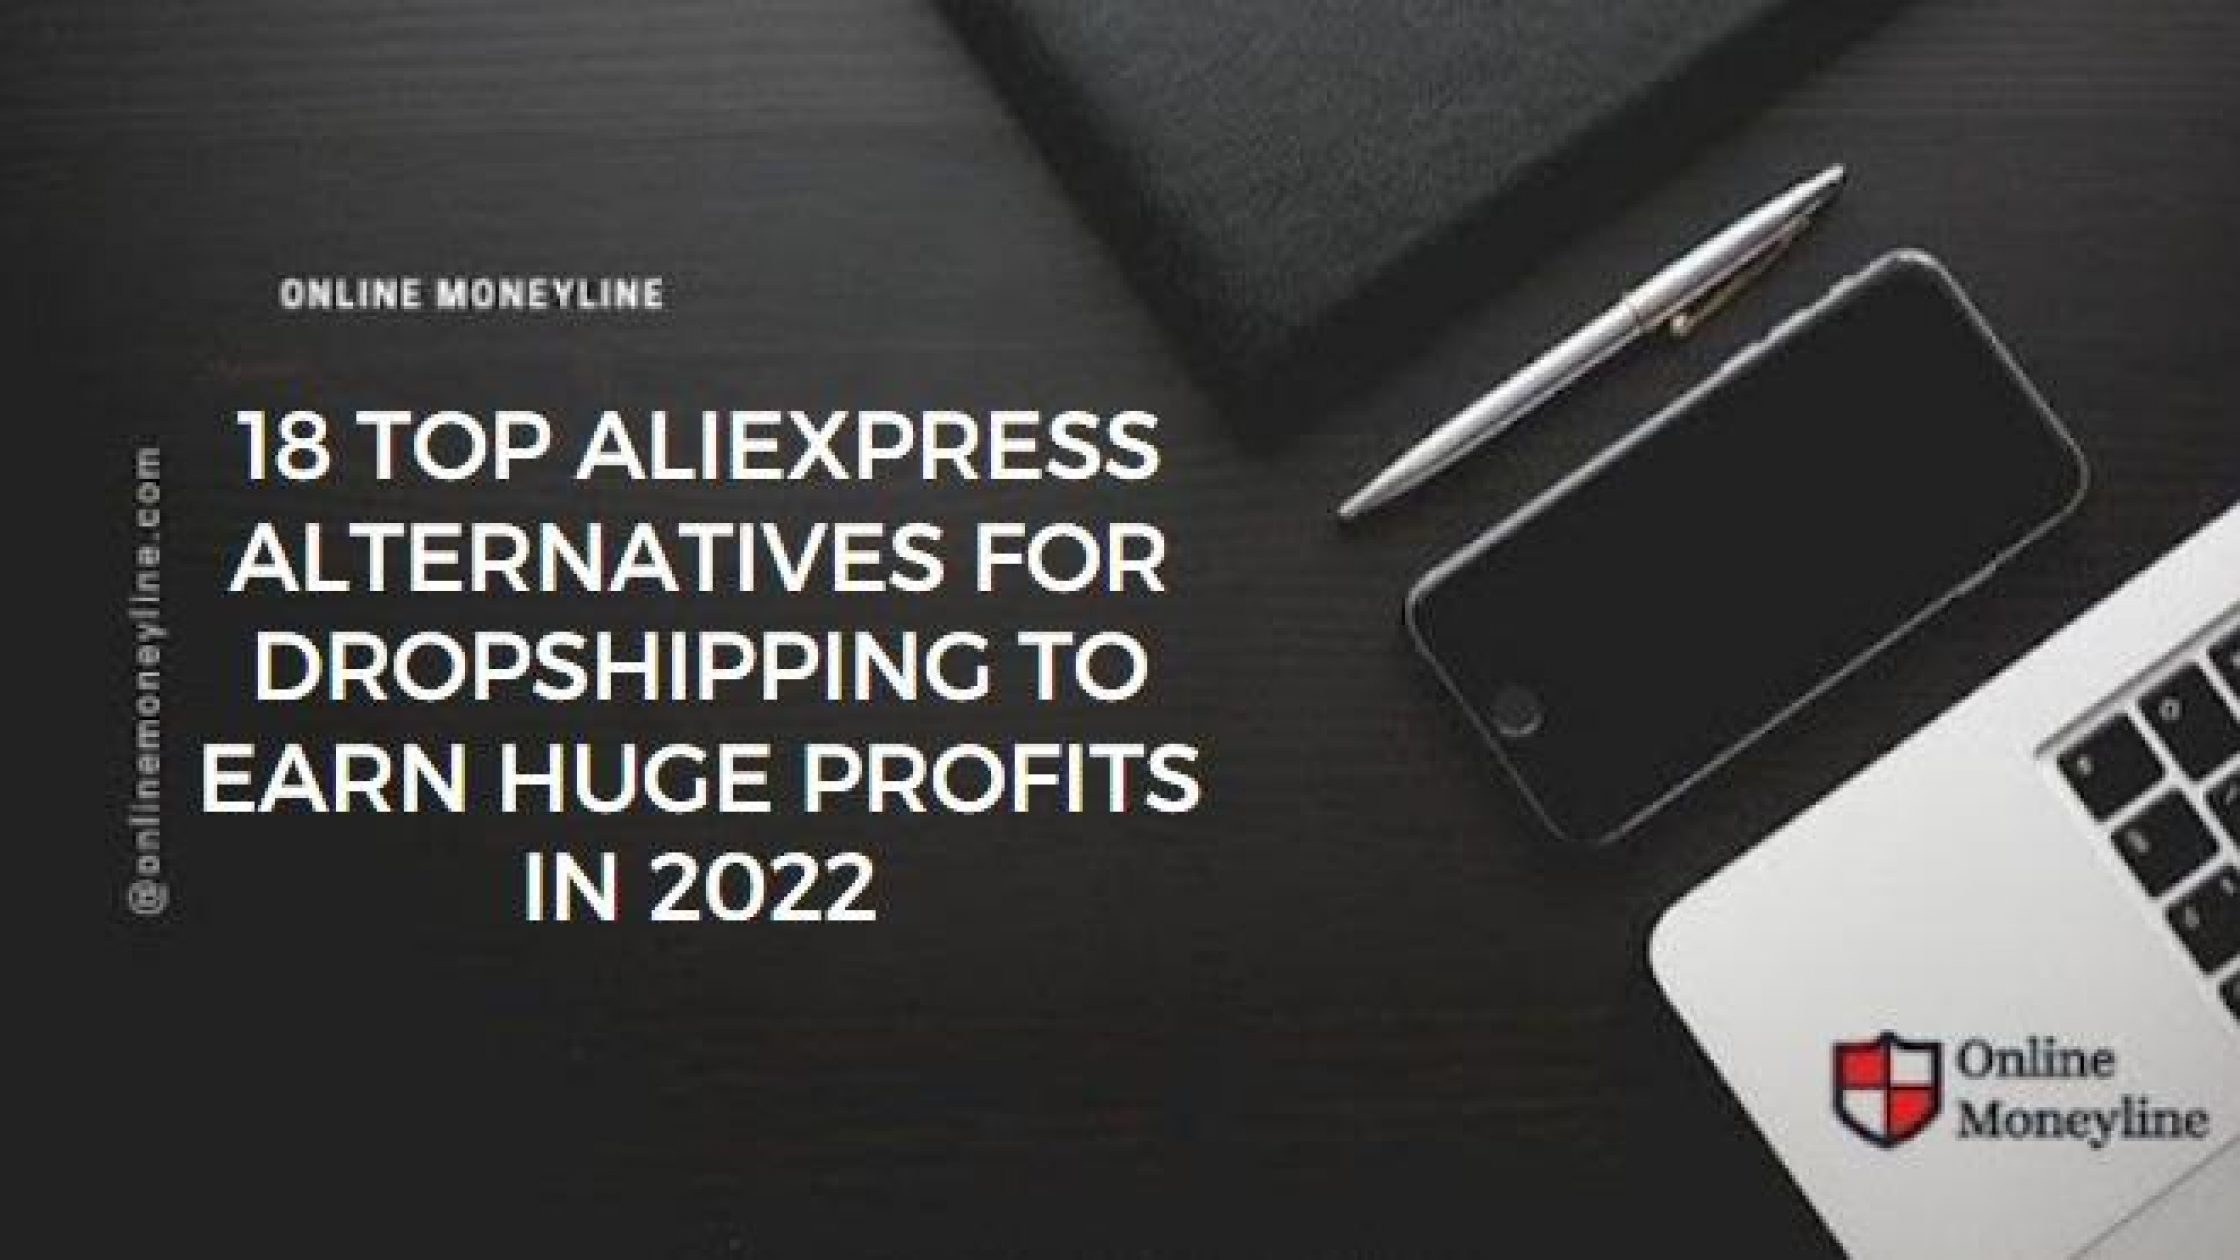 18 Top AliExpress Alternatives For Dropshipping To Earn Huge Profits